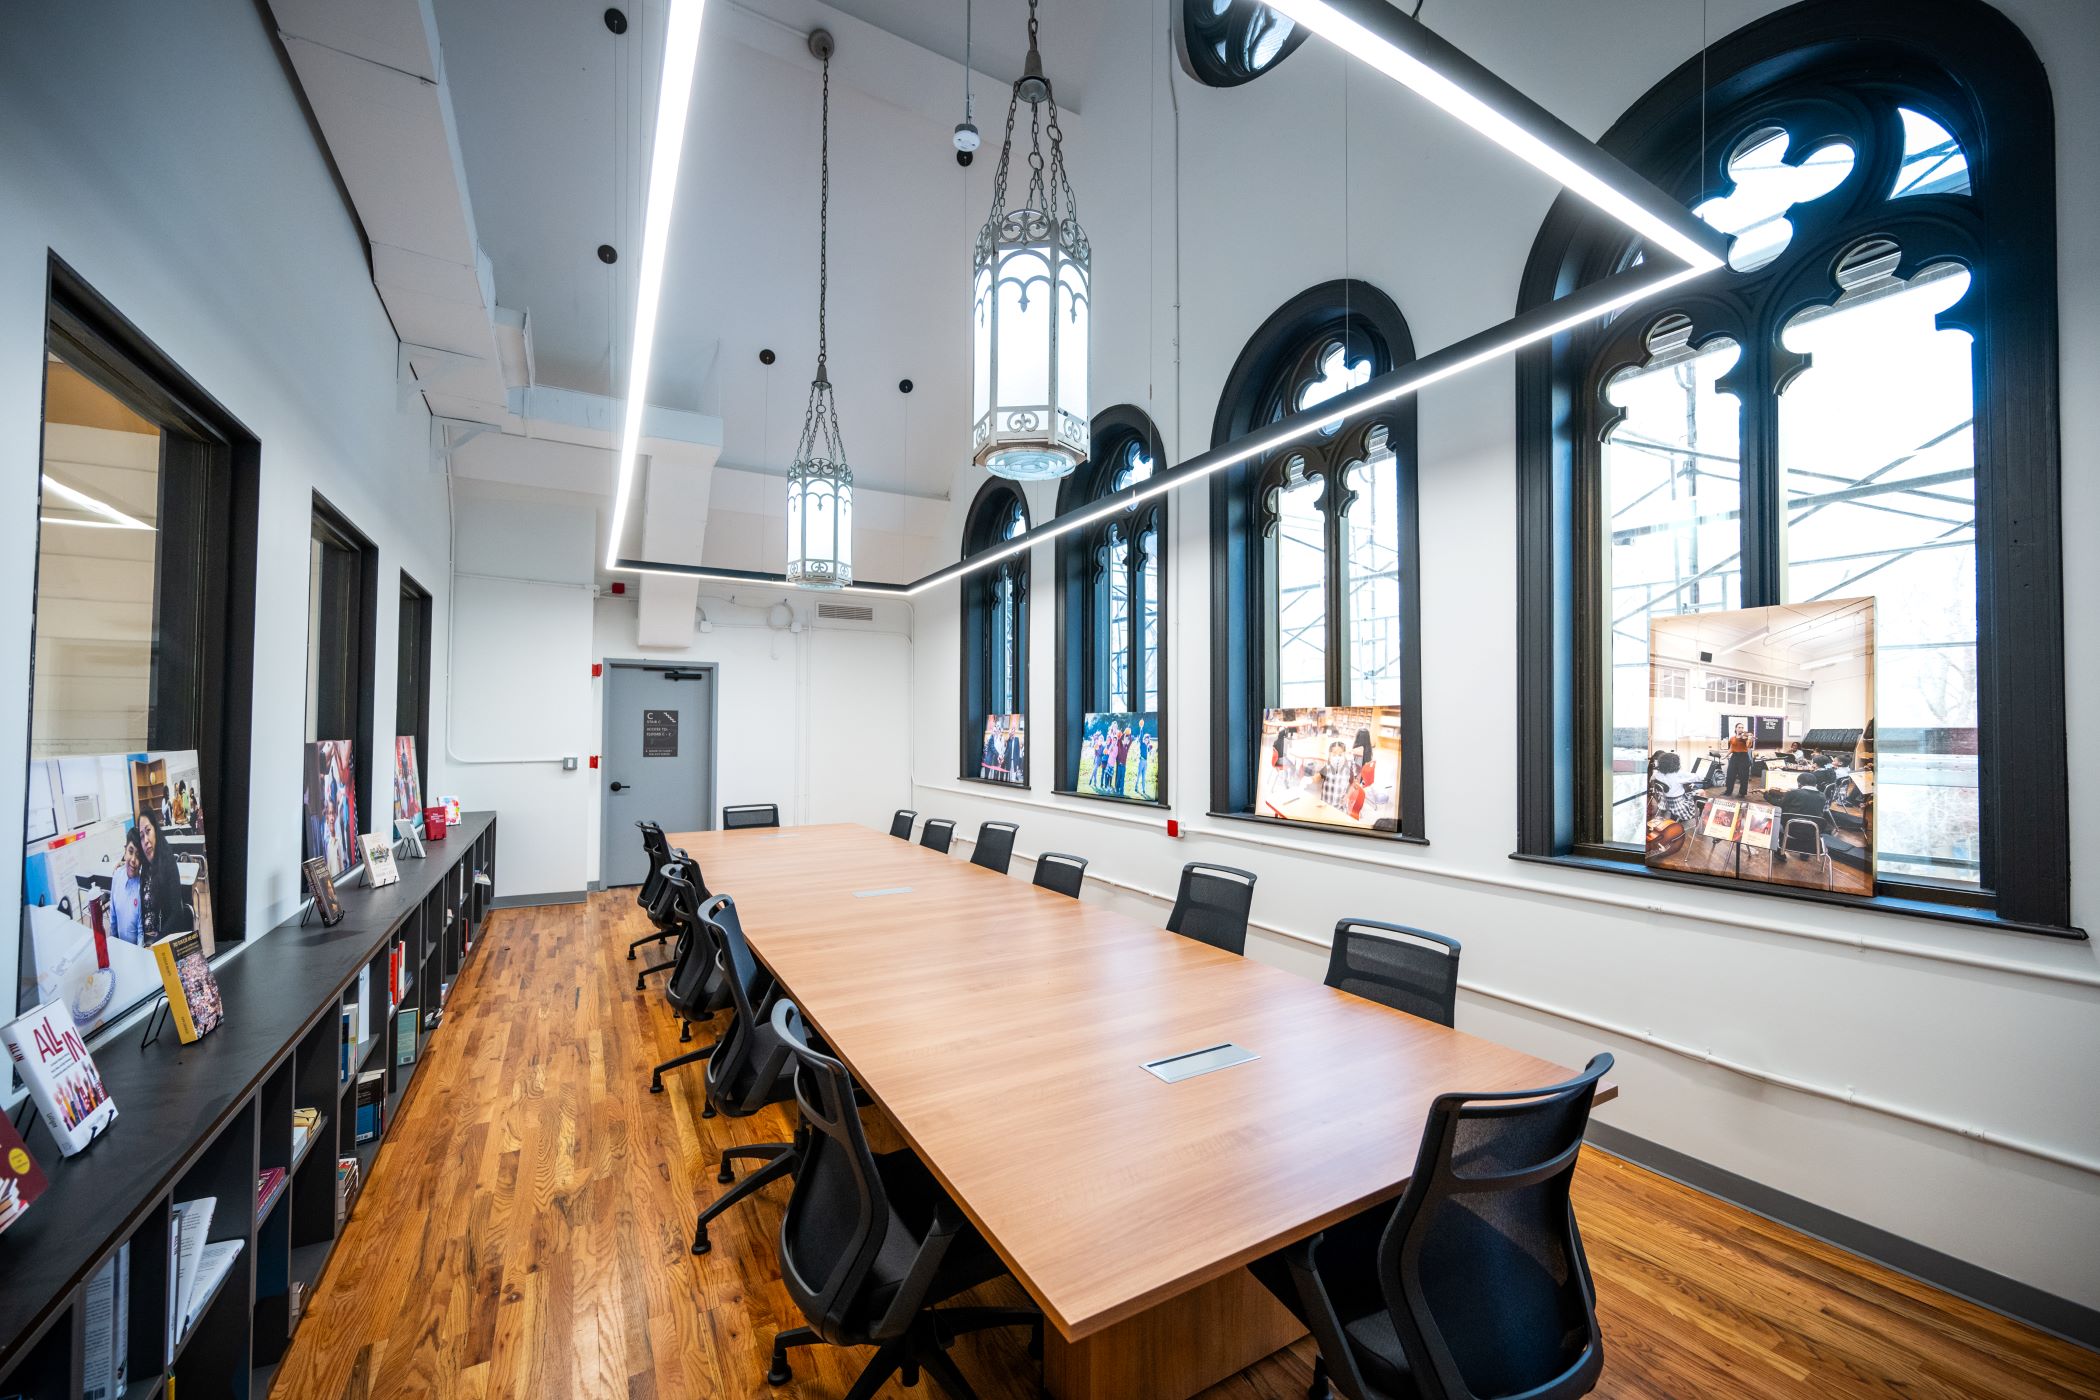 conference room with one large table, ornate church windows